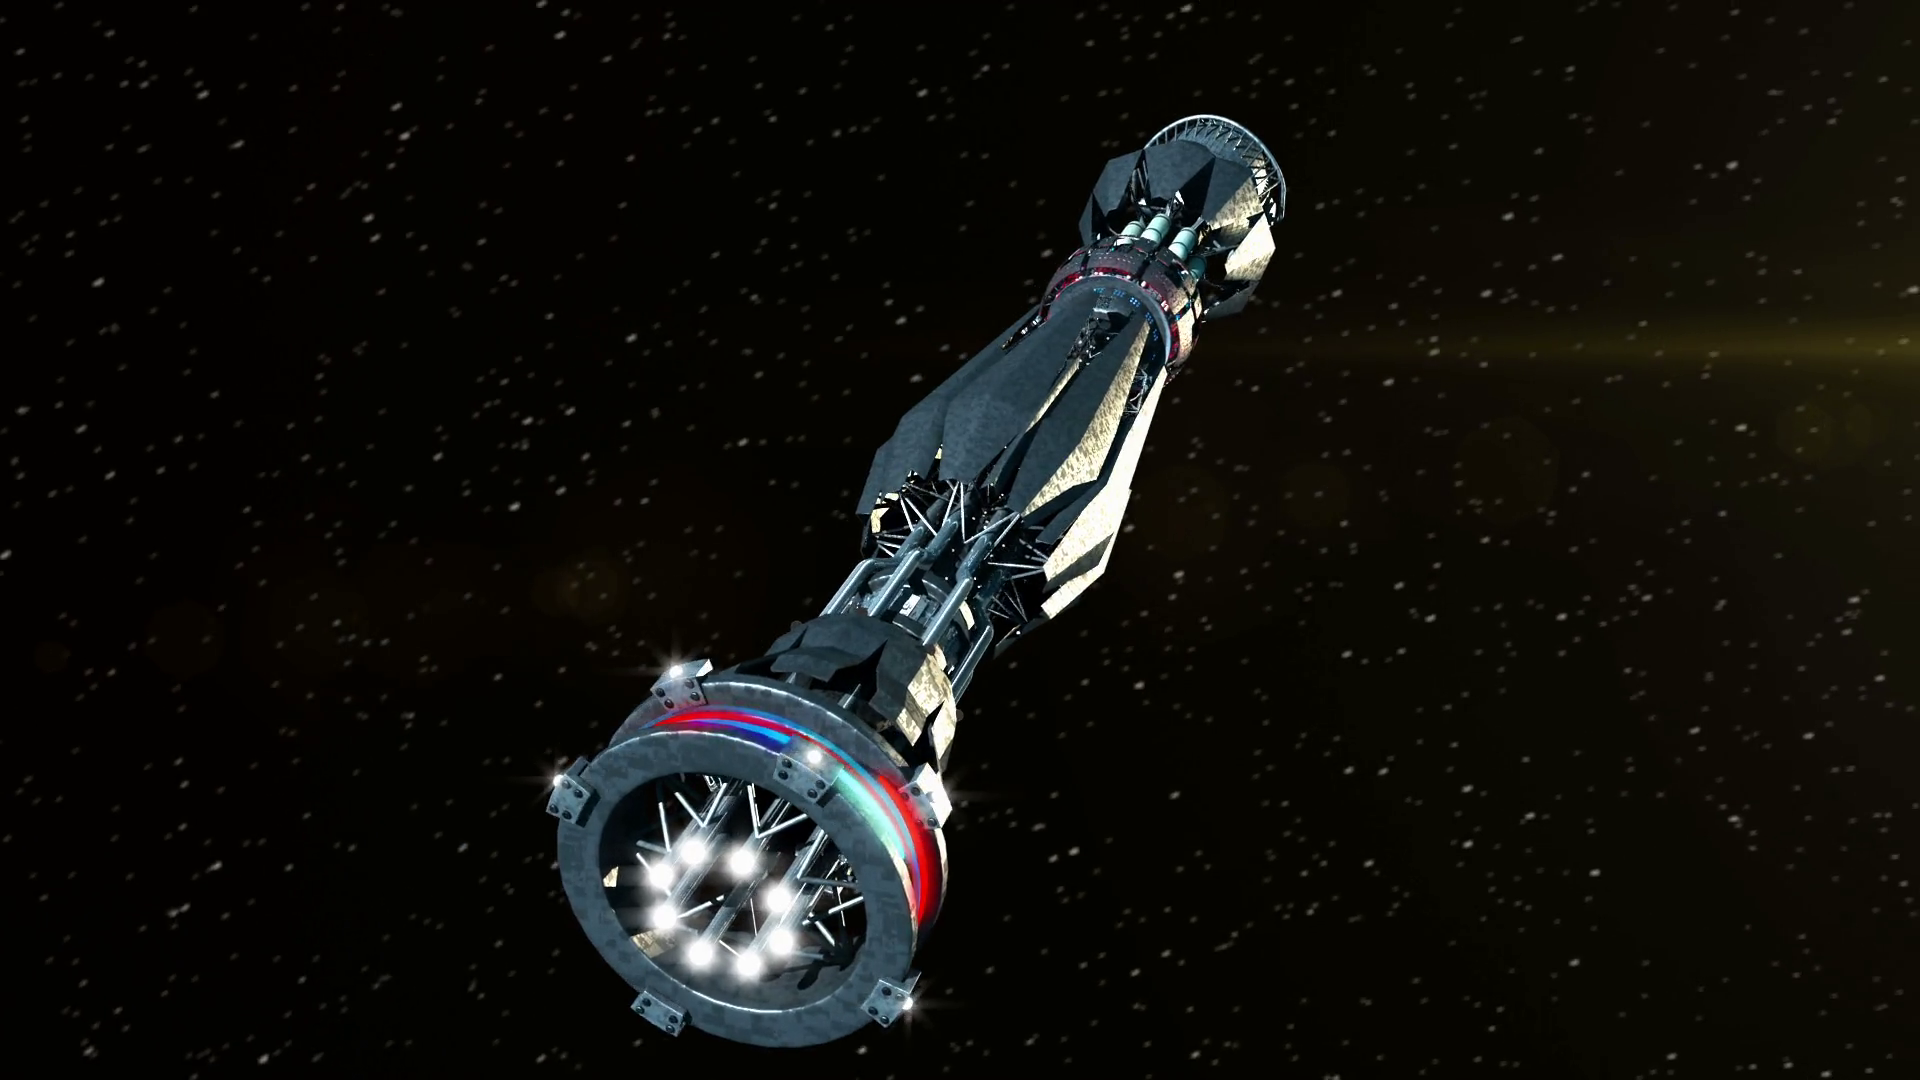 Futuristic military spacecraft initiating a warp drive and opening